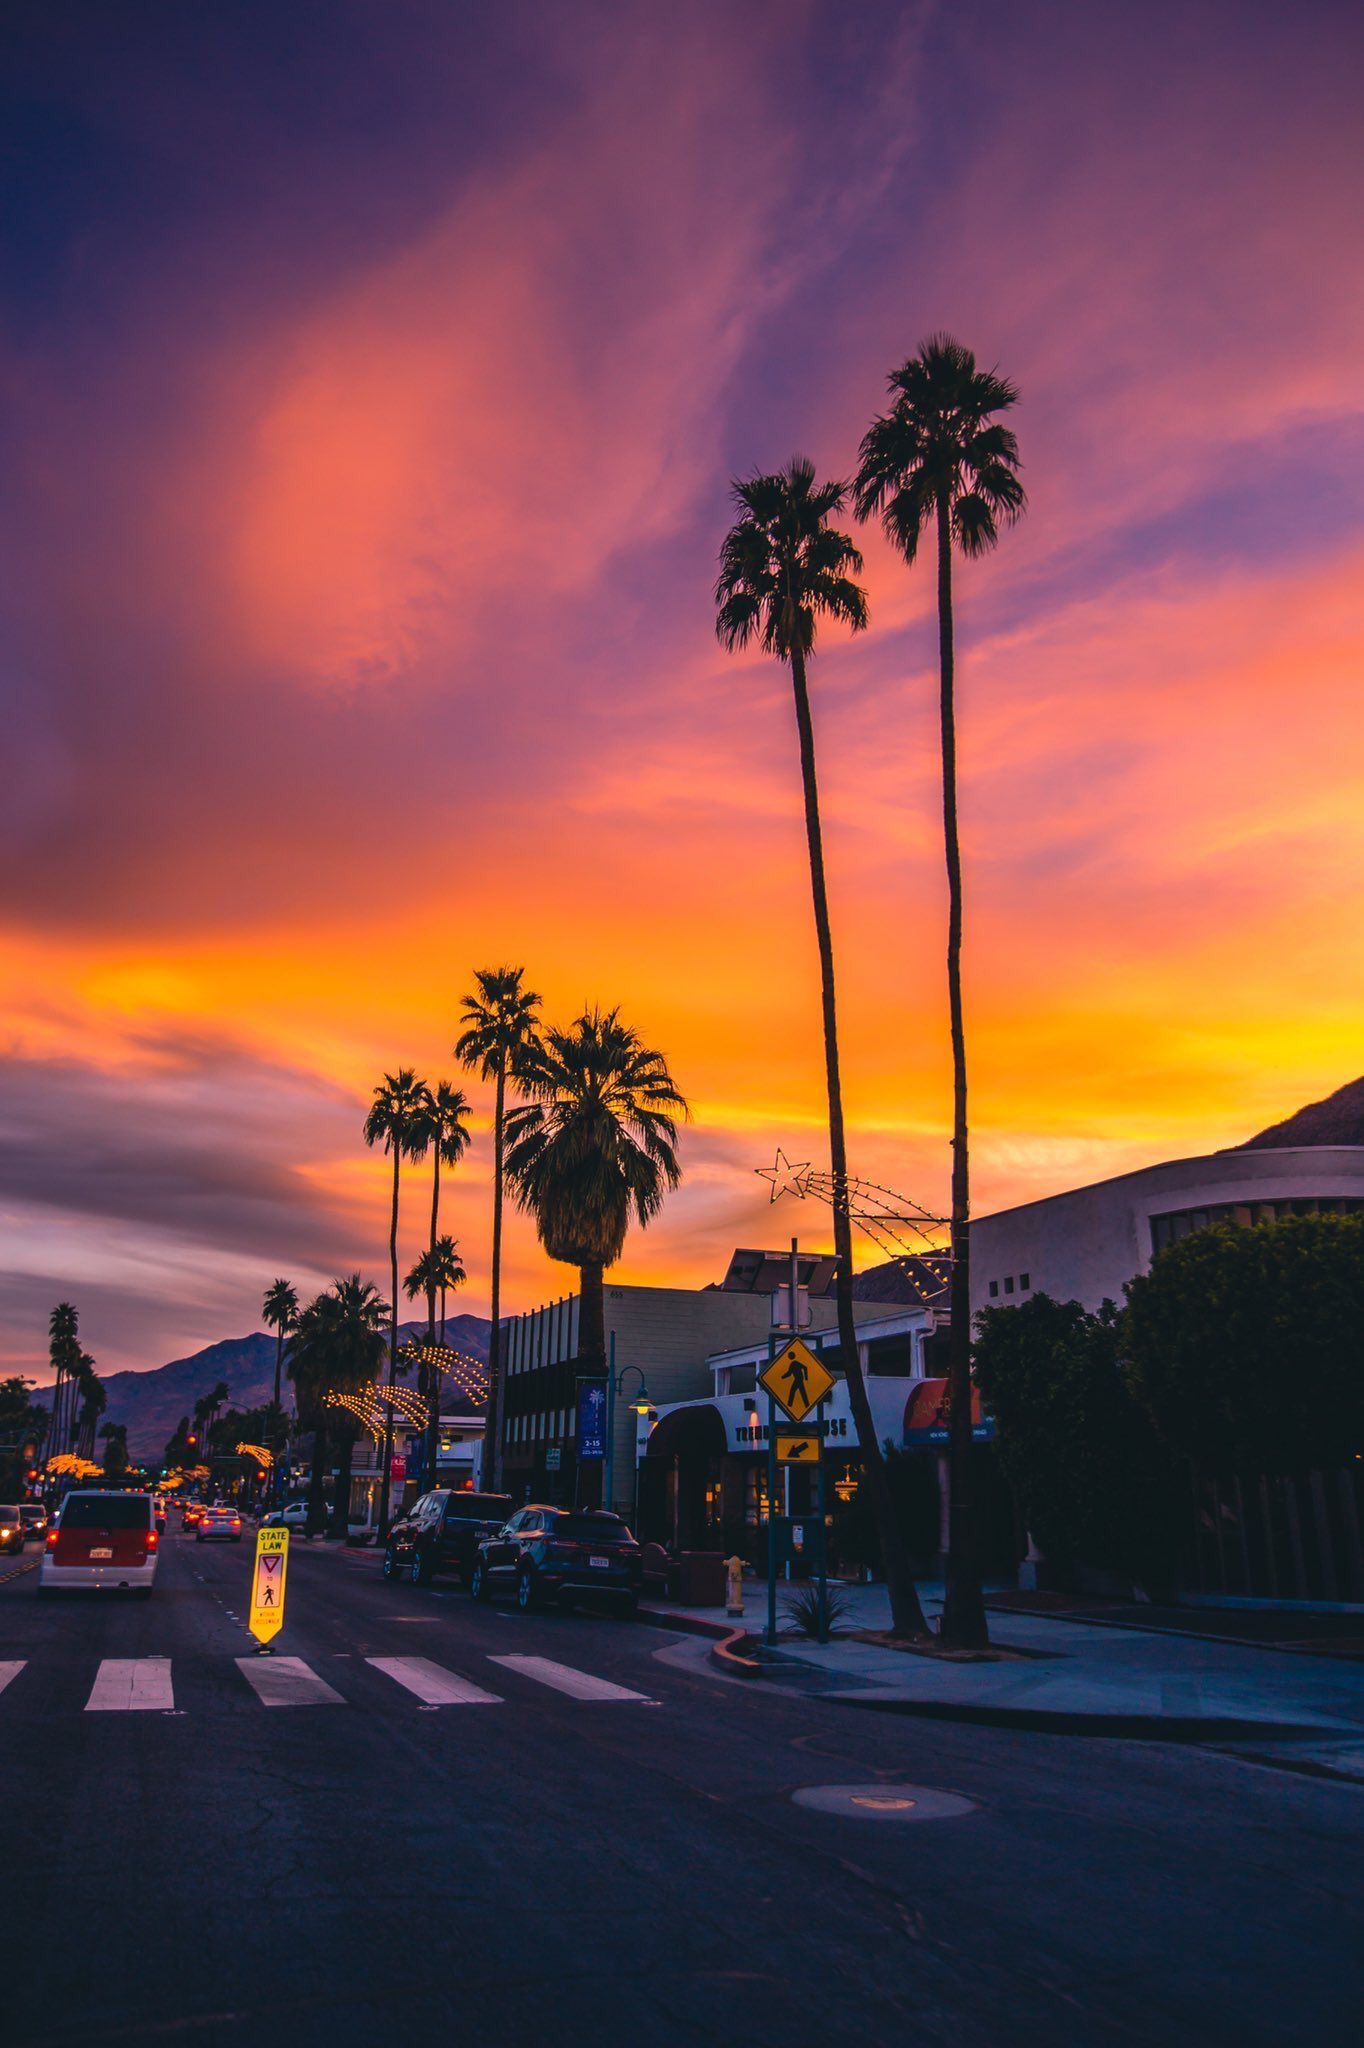 A street with palm trees and cars at sunset - Sunset, photography, California